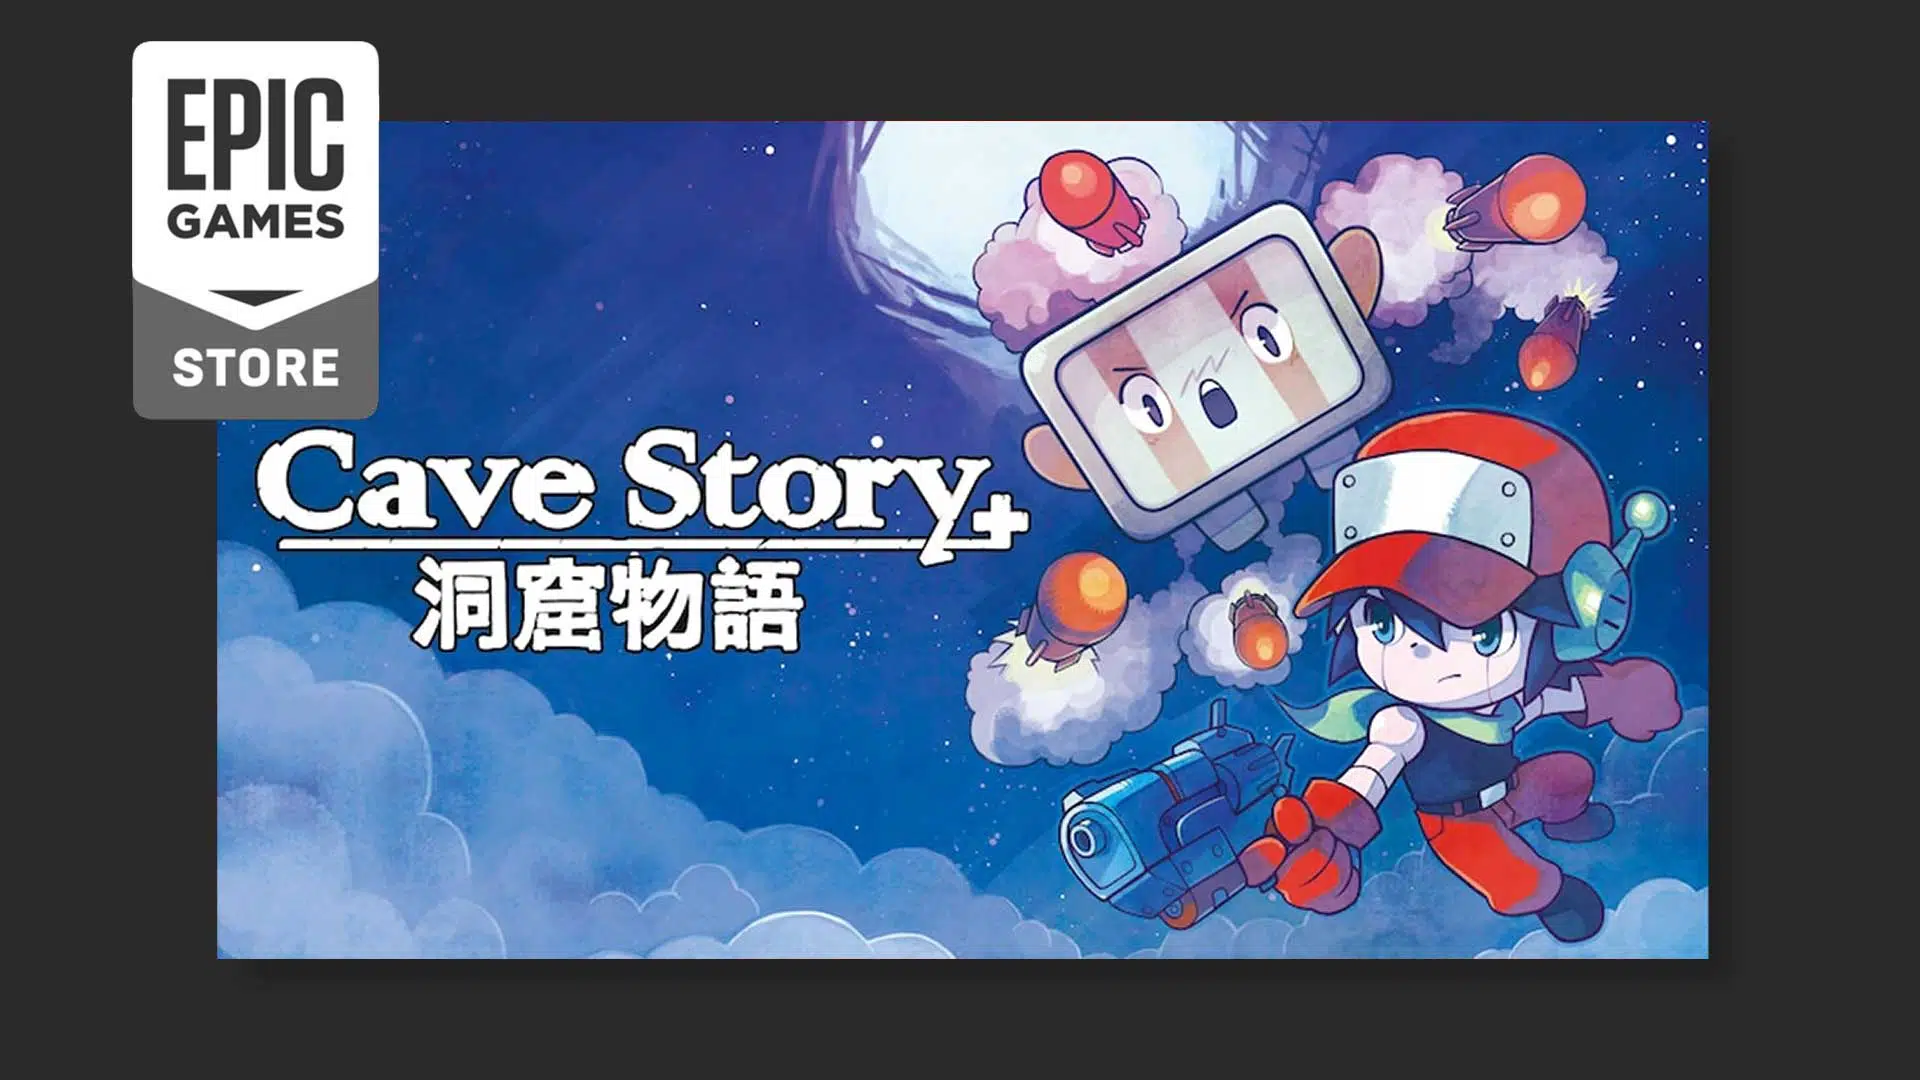 epic games store cave story